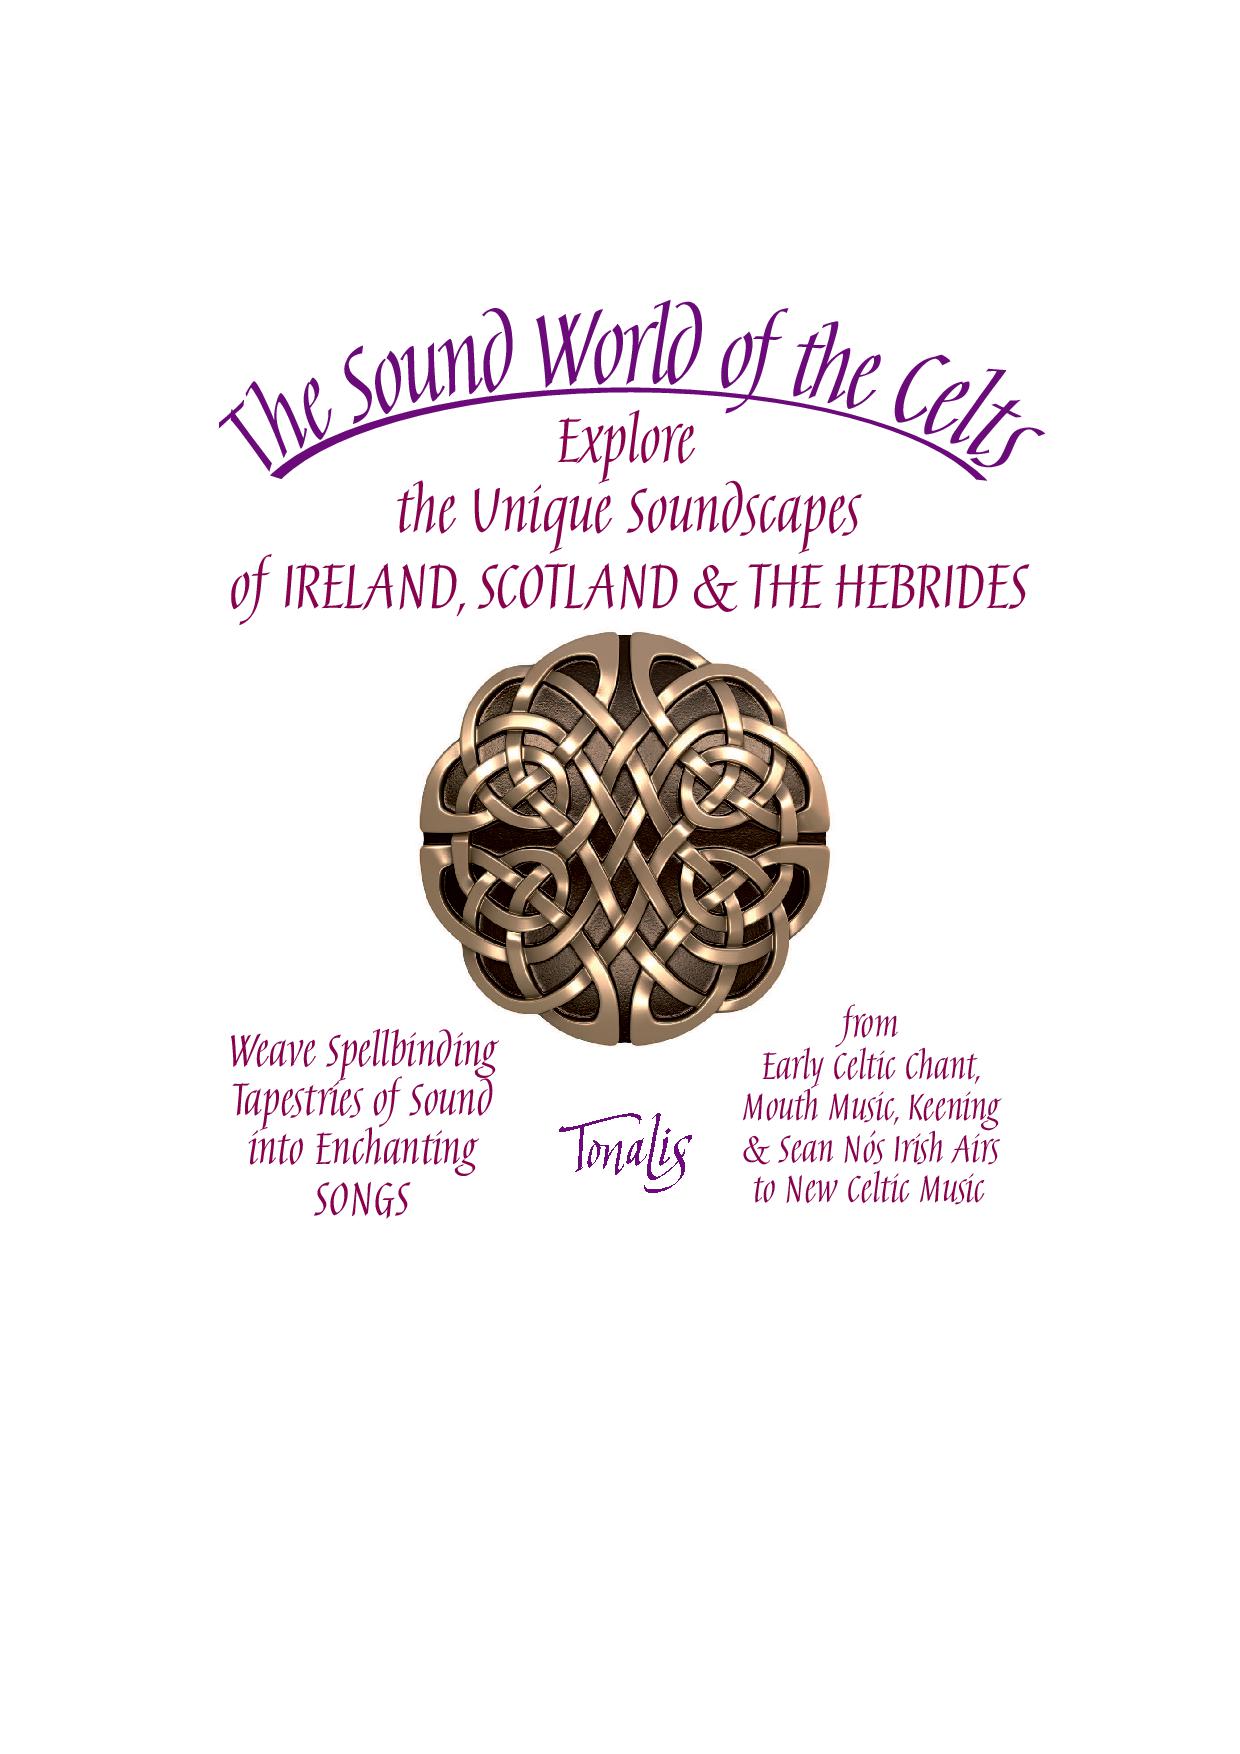 YORKSHIRE - THE SOUND WORLD OF THE CELTS